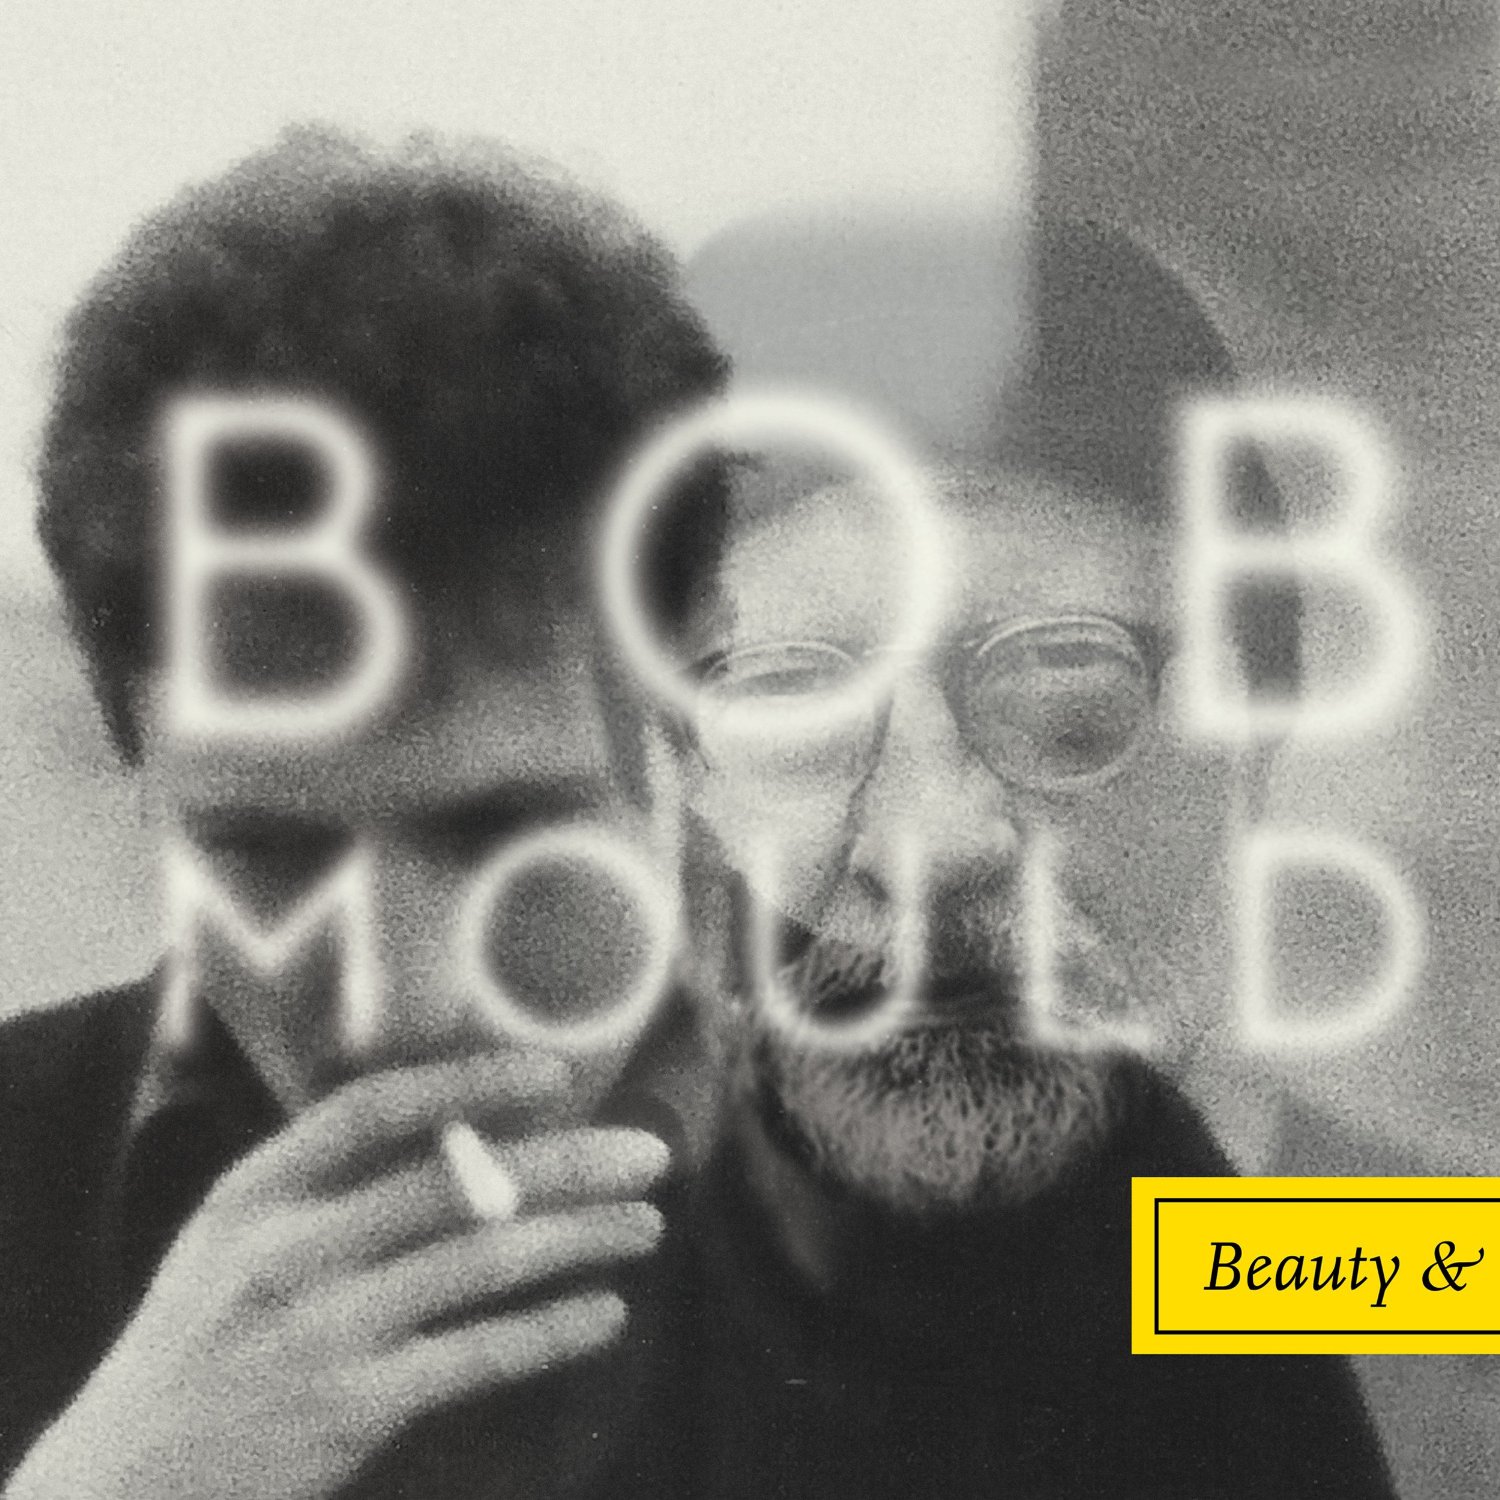 Video: “The War” by Bob Mould